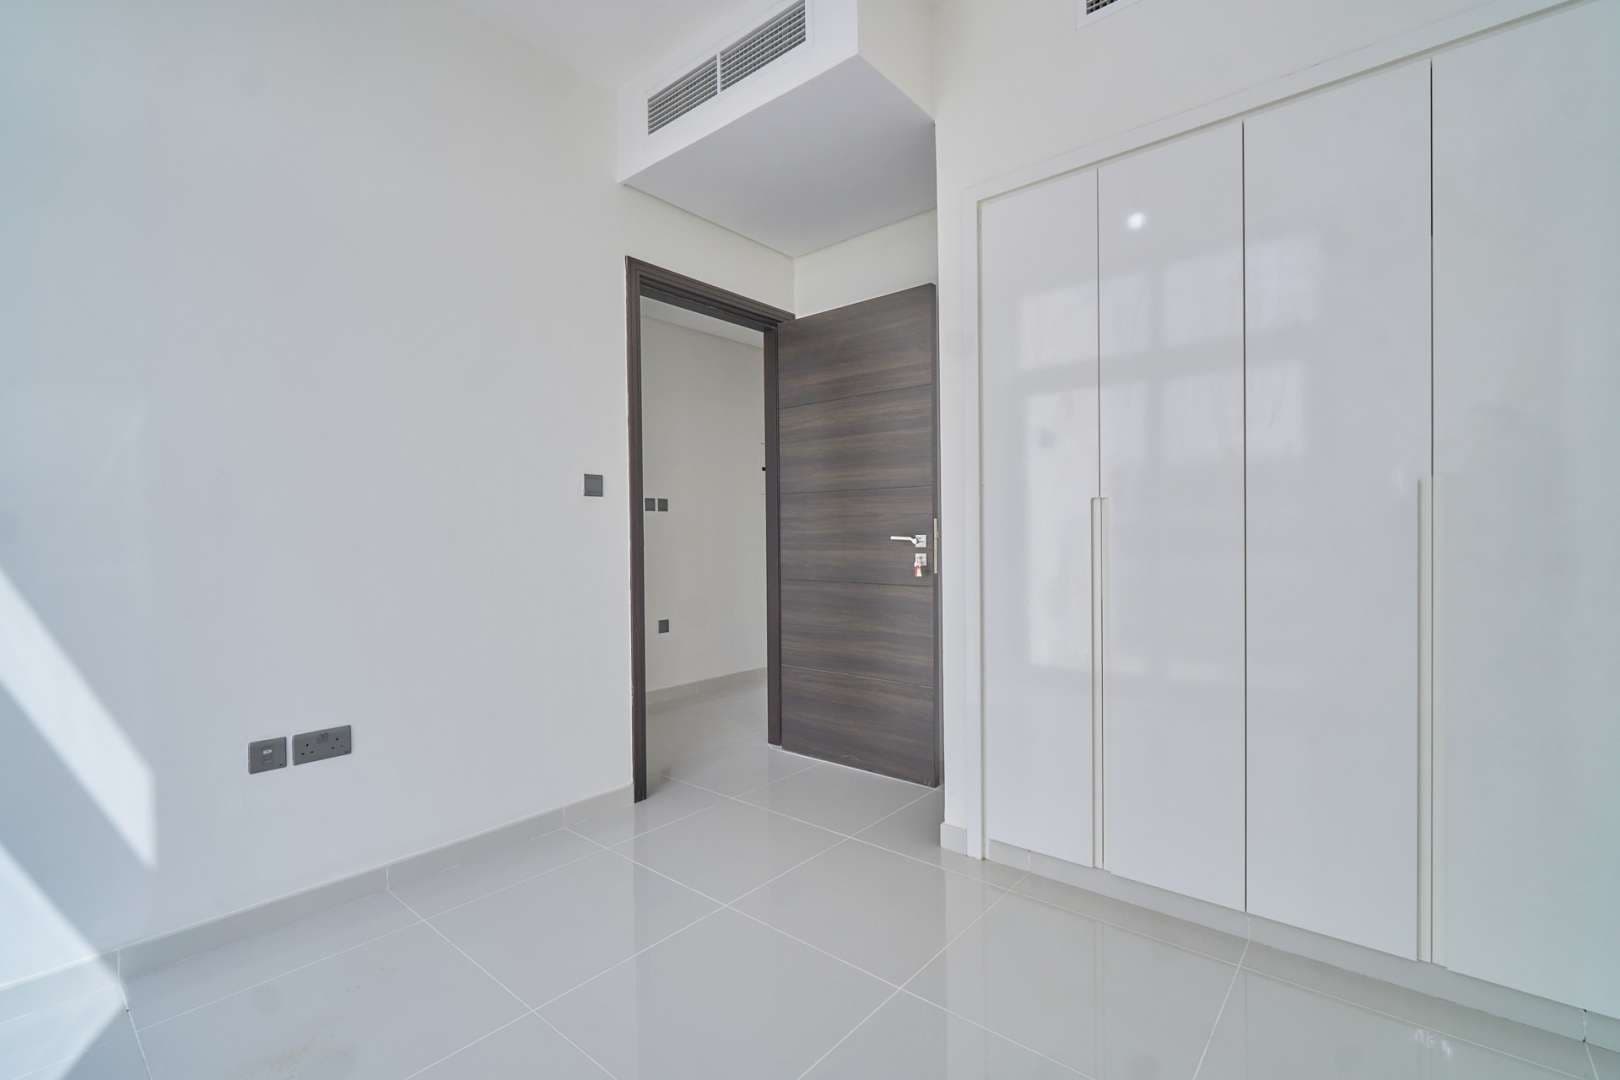 3 Bedroom Townhouse For Rent Mimosa Lp07923 3cfb4f9b9305400.jpg